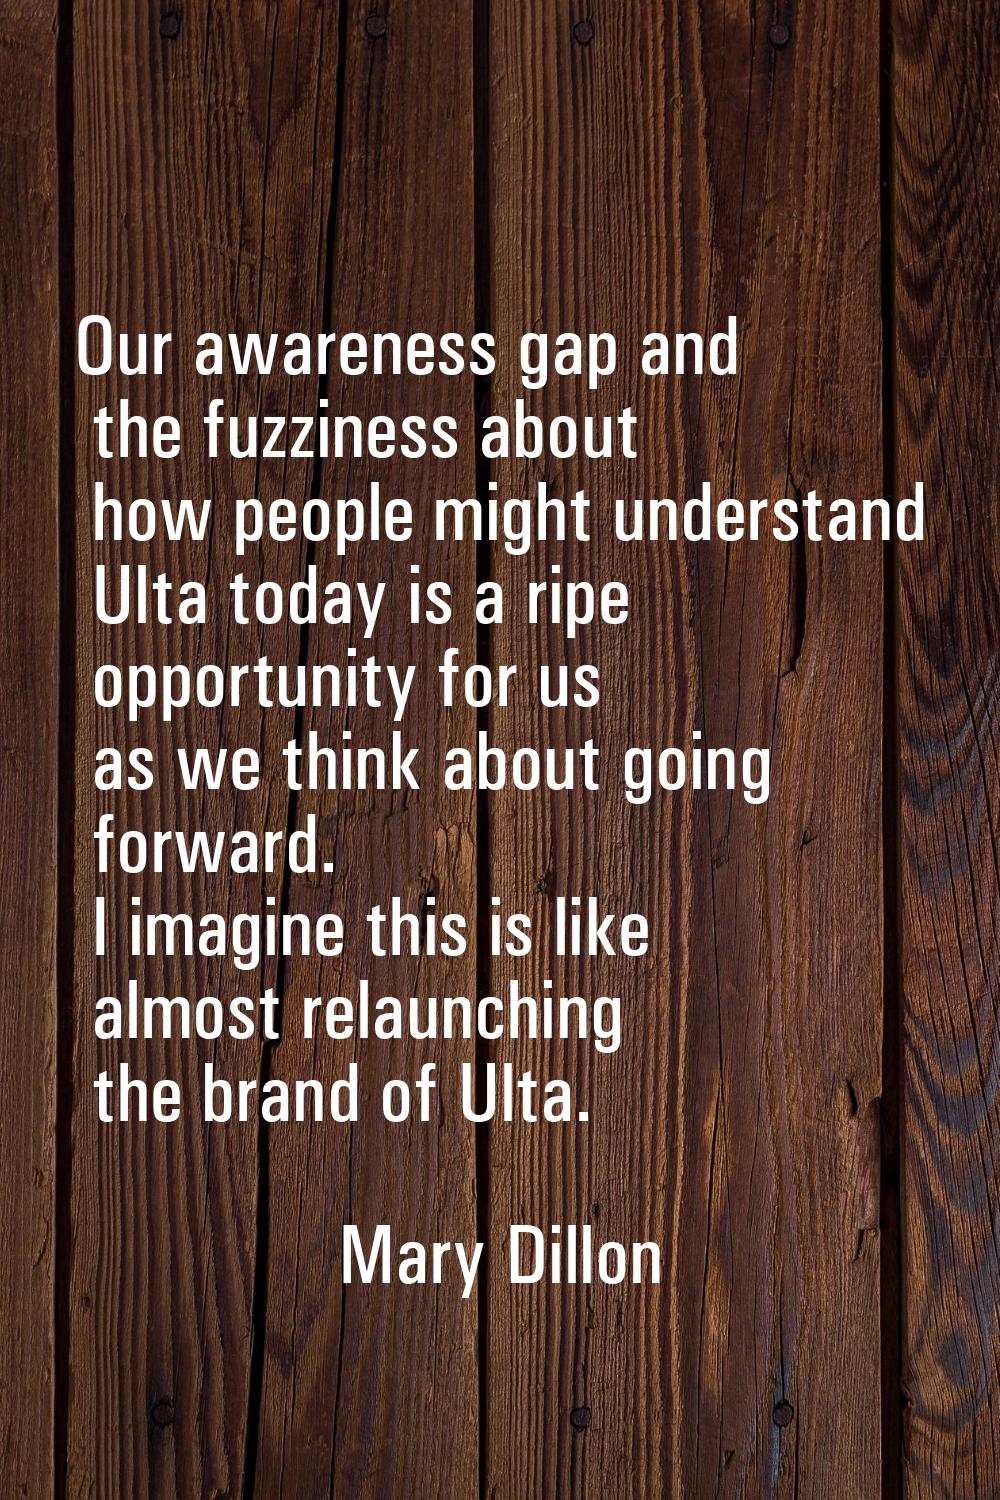 Our awareness gap and the fuzziness about how people might understand Ulta today is a ripe opportun